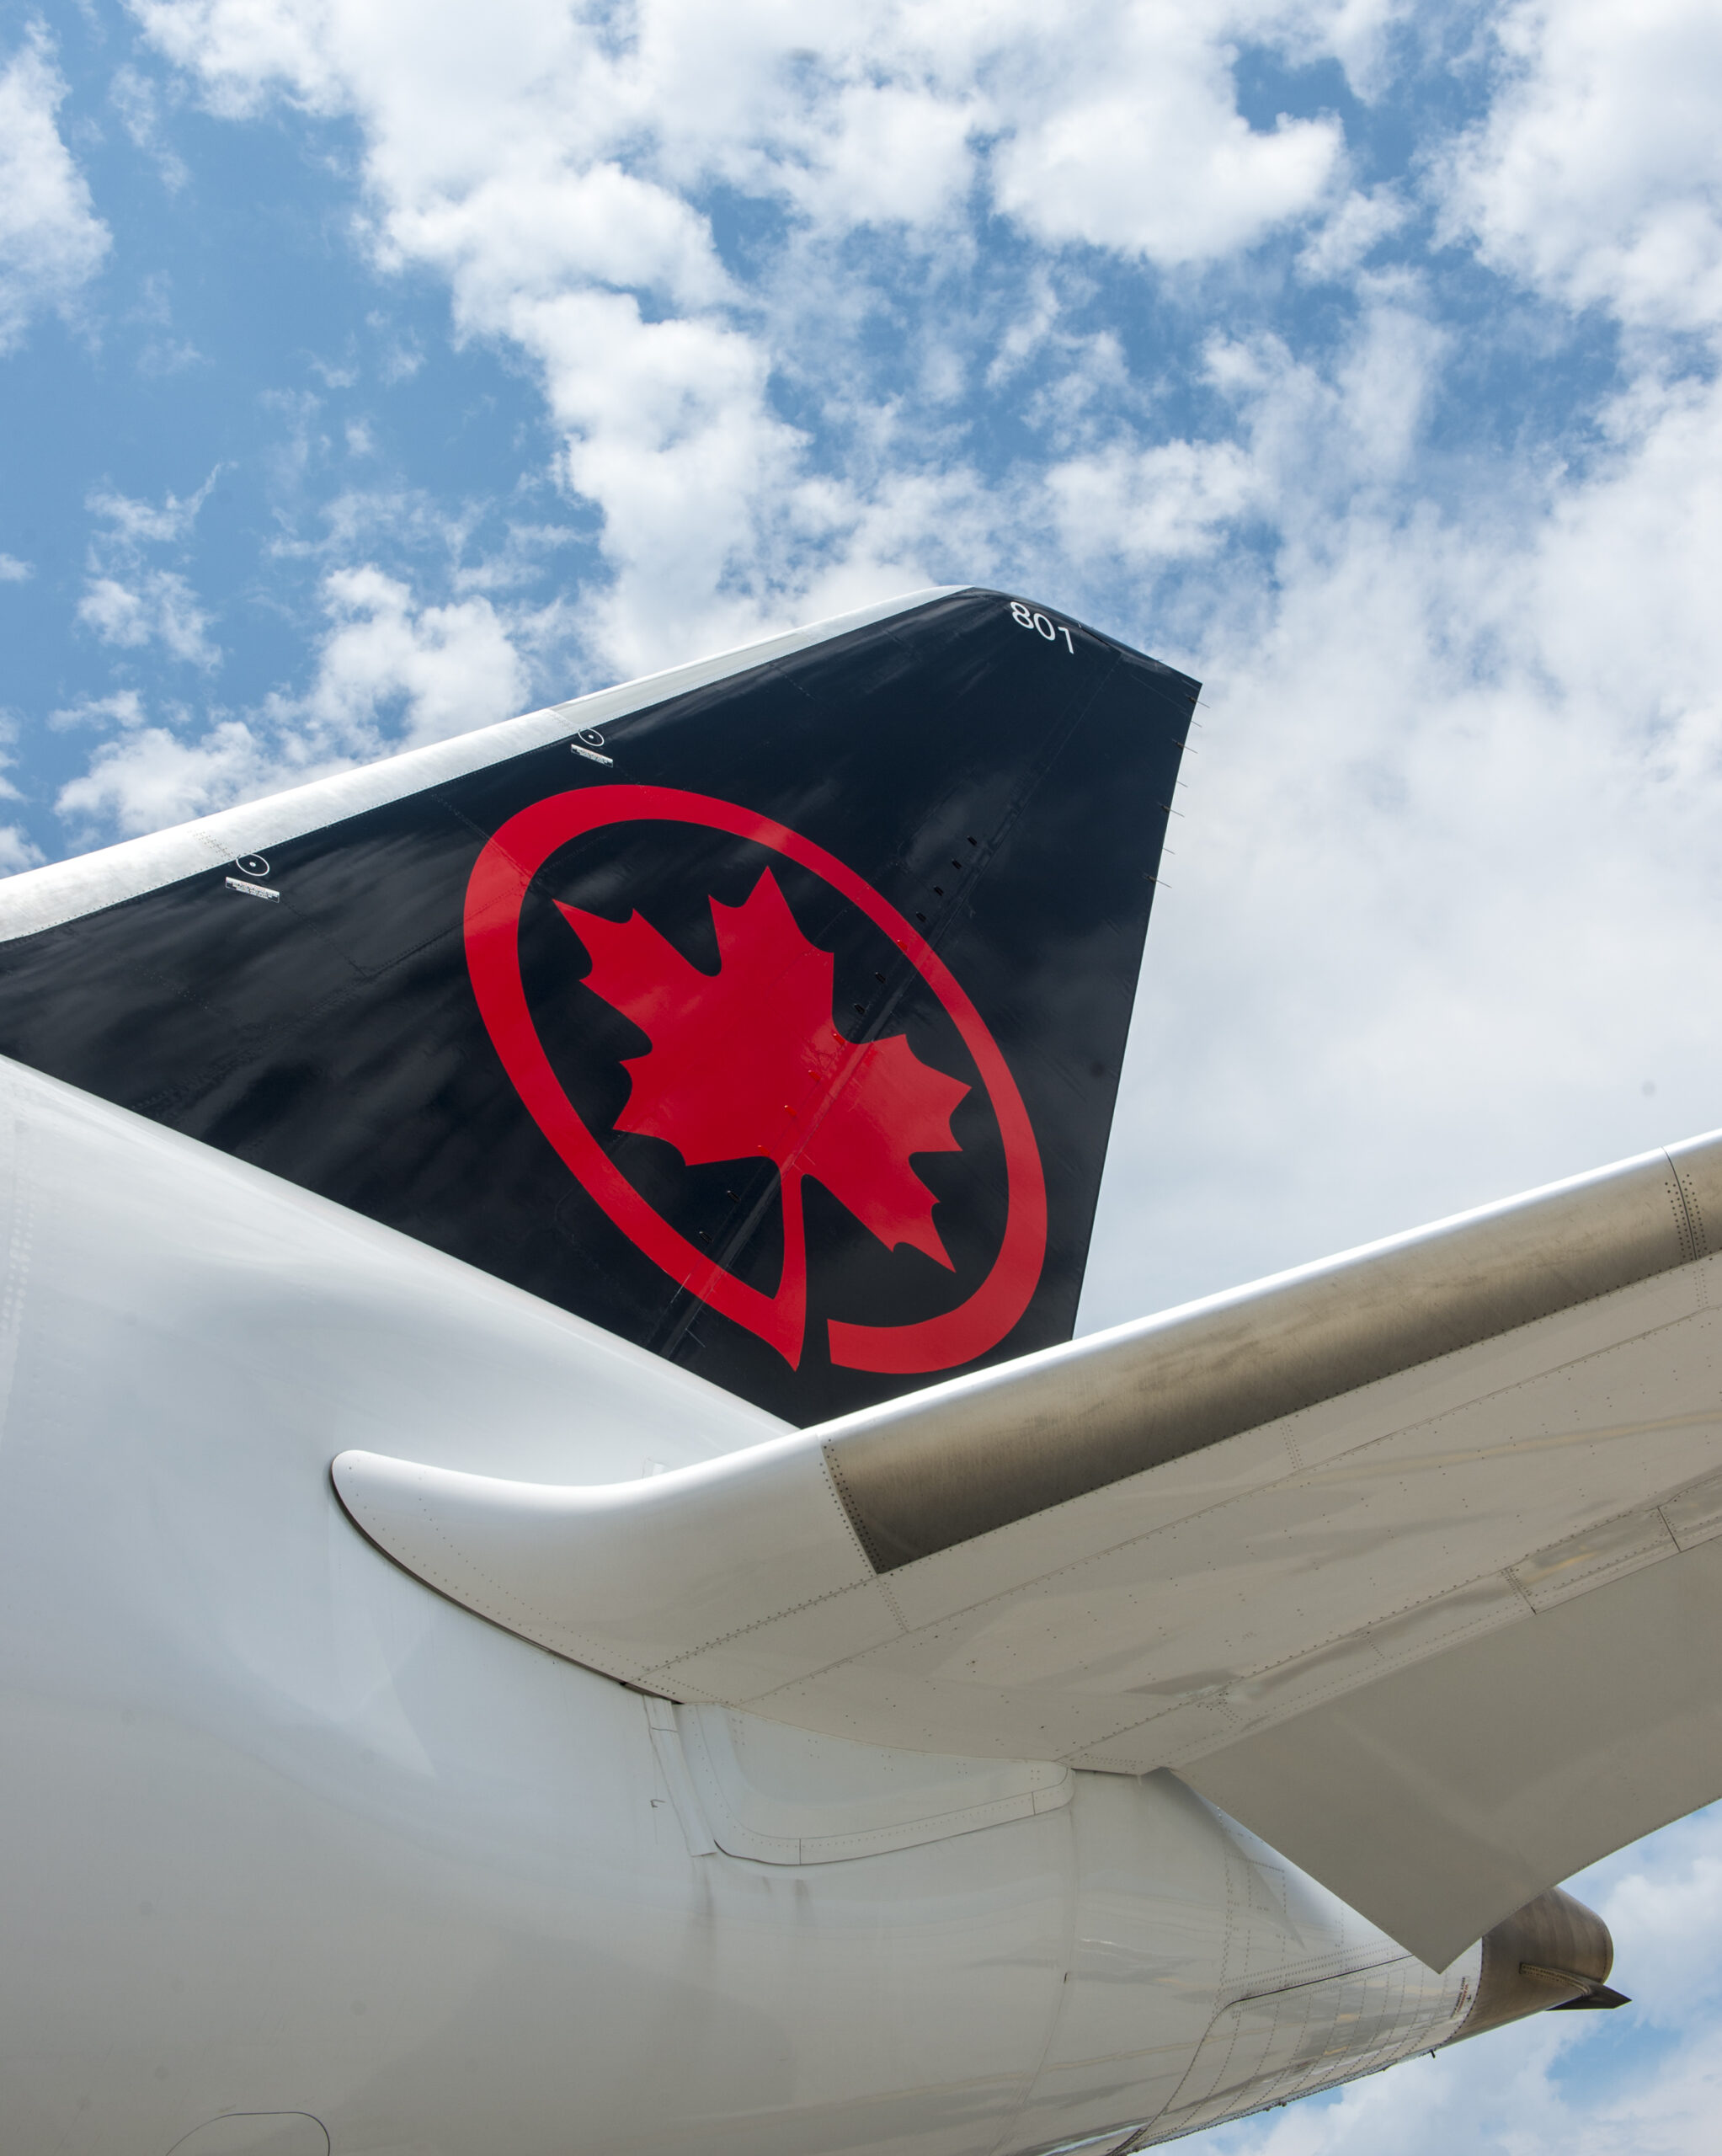 Air Canada is Boosting its Winter Network With 55 Routes to Sunny Destinations